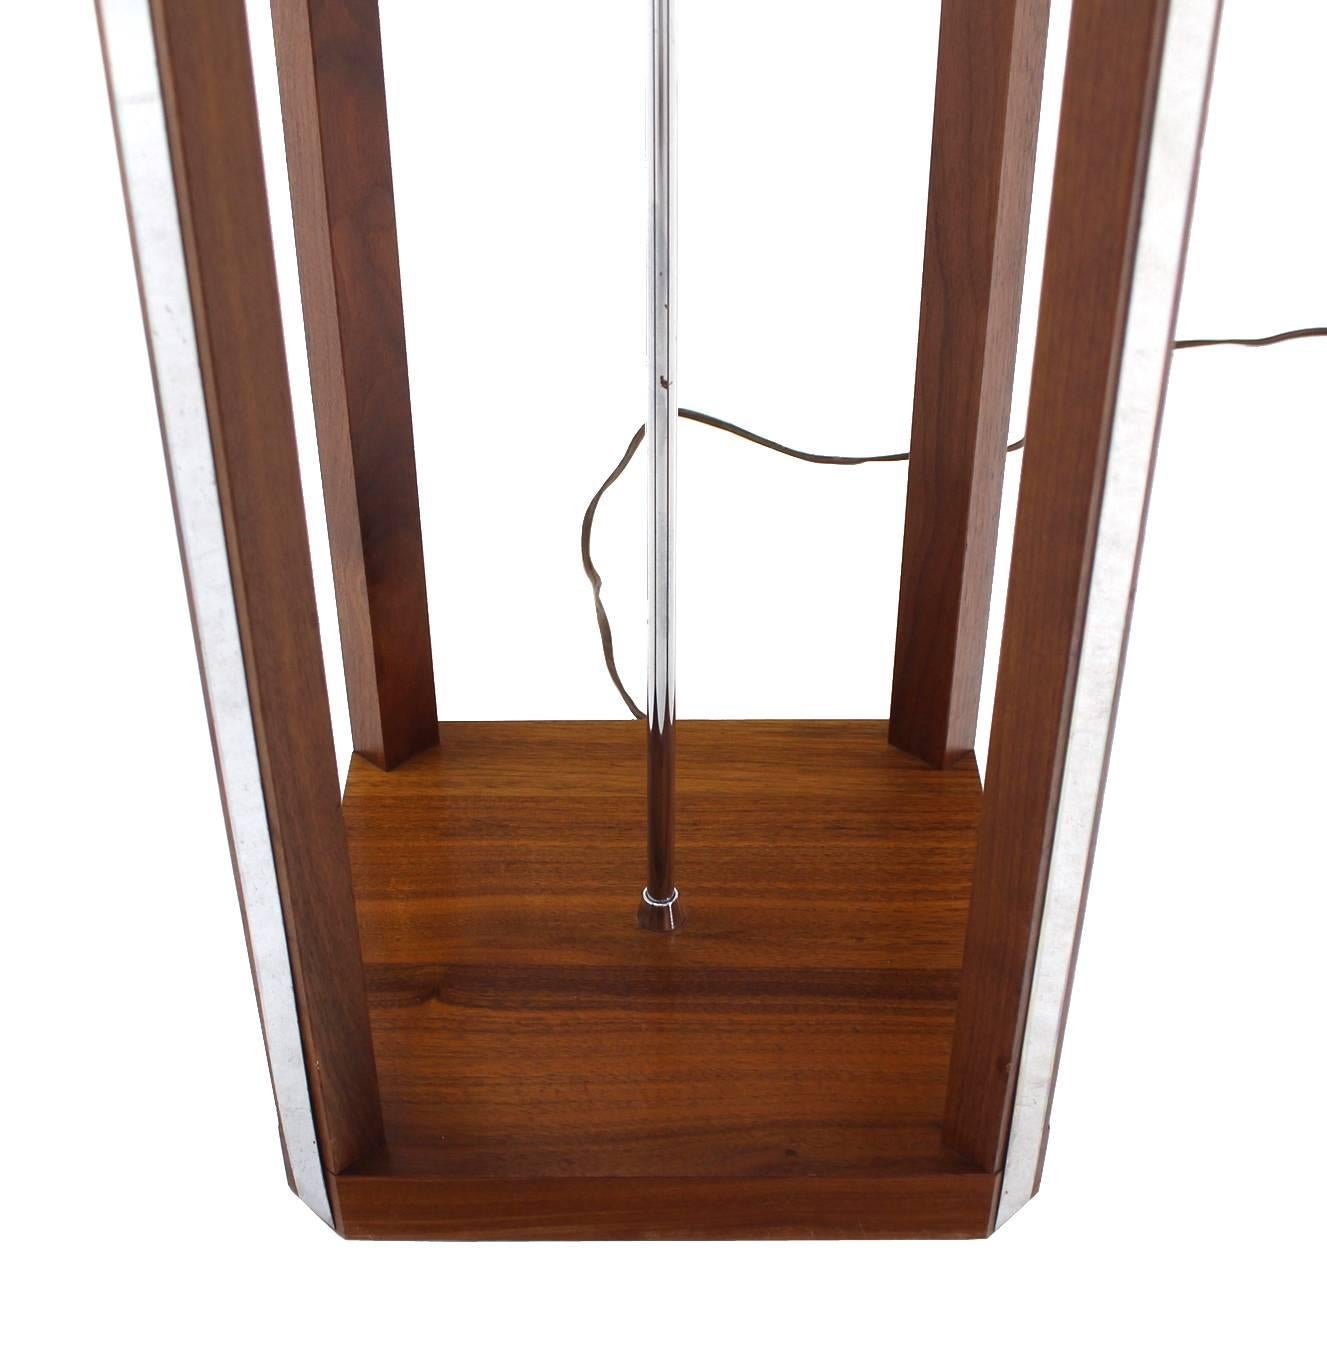 Walnut Square Tower Shape Mid-Century Modern Floor Lamp In Excellent Condition For Sale In Rockaway, NJ